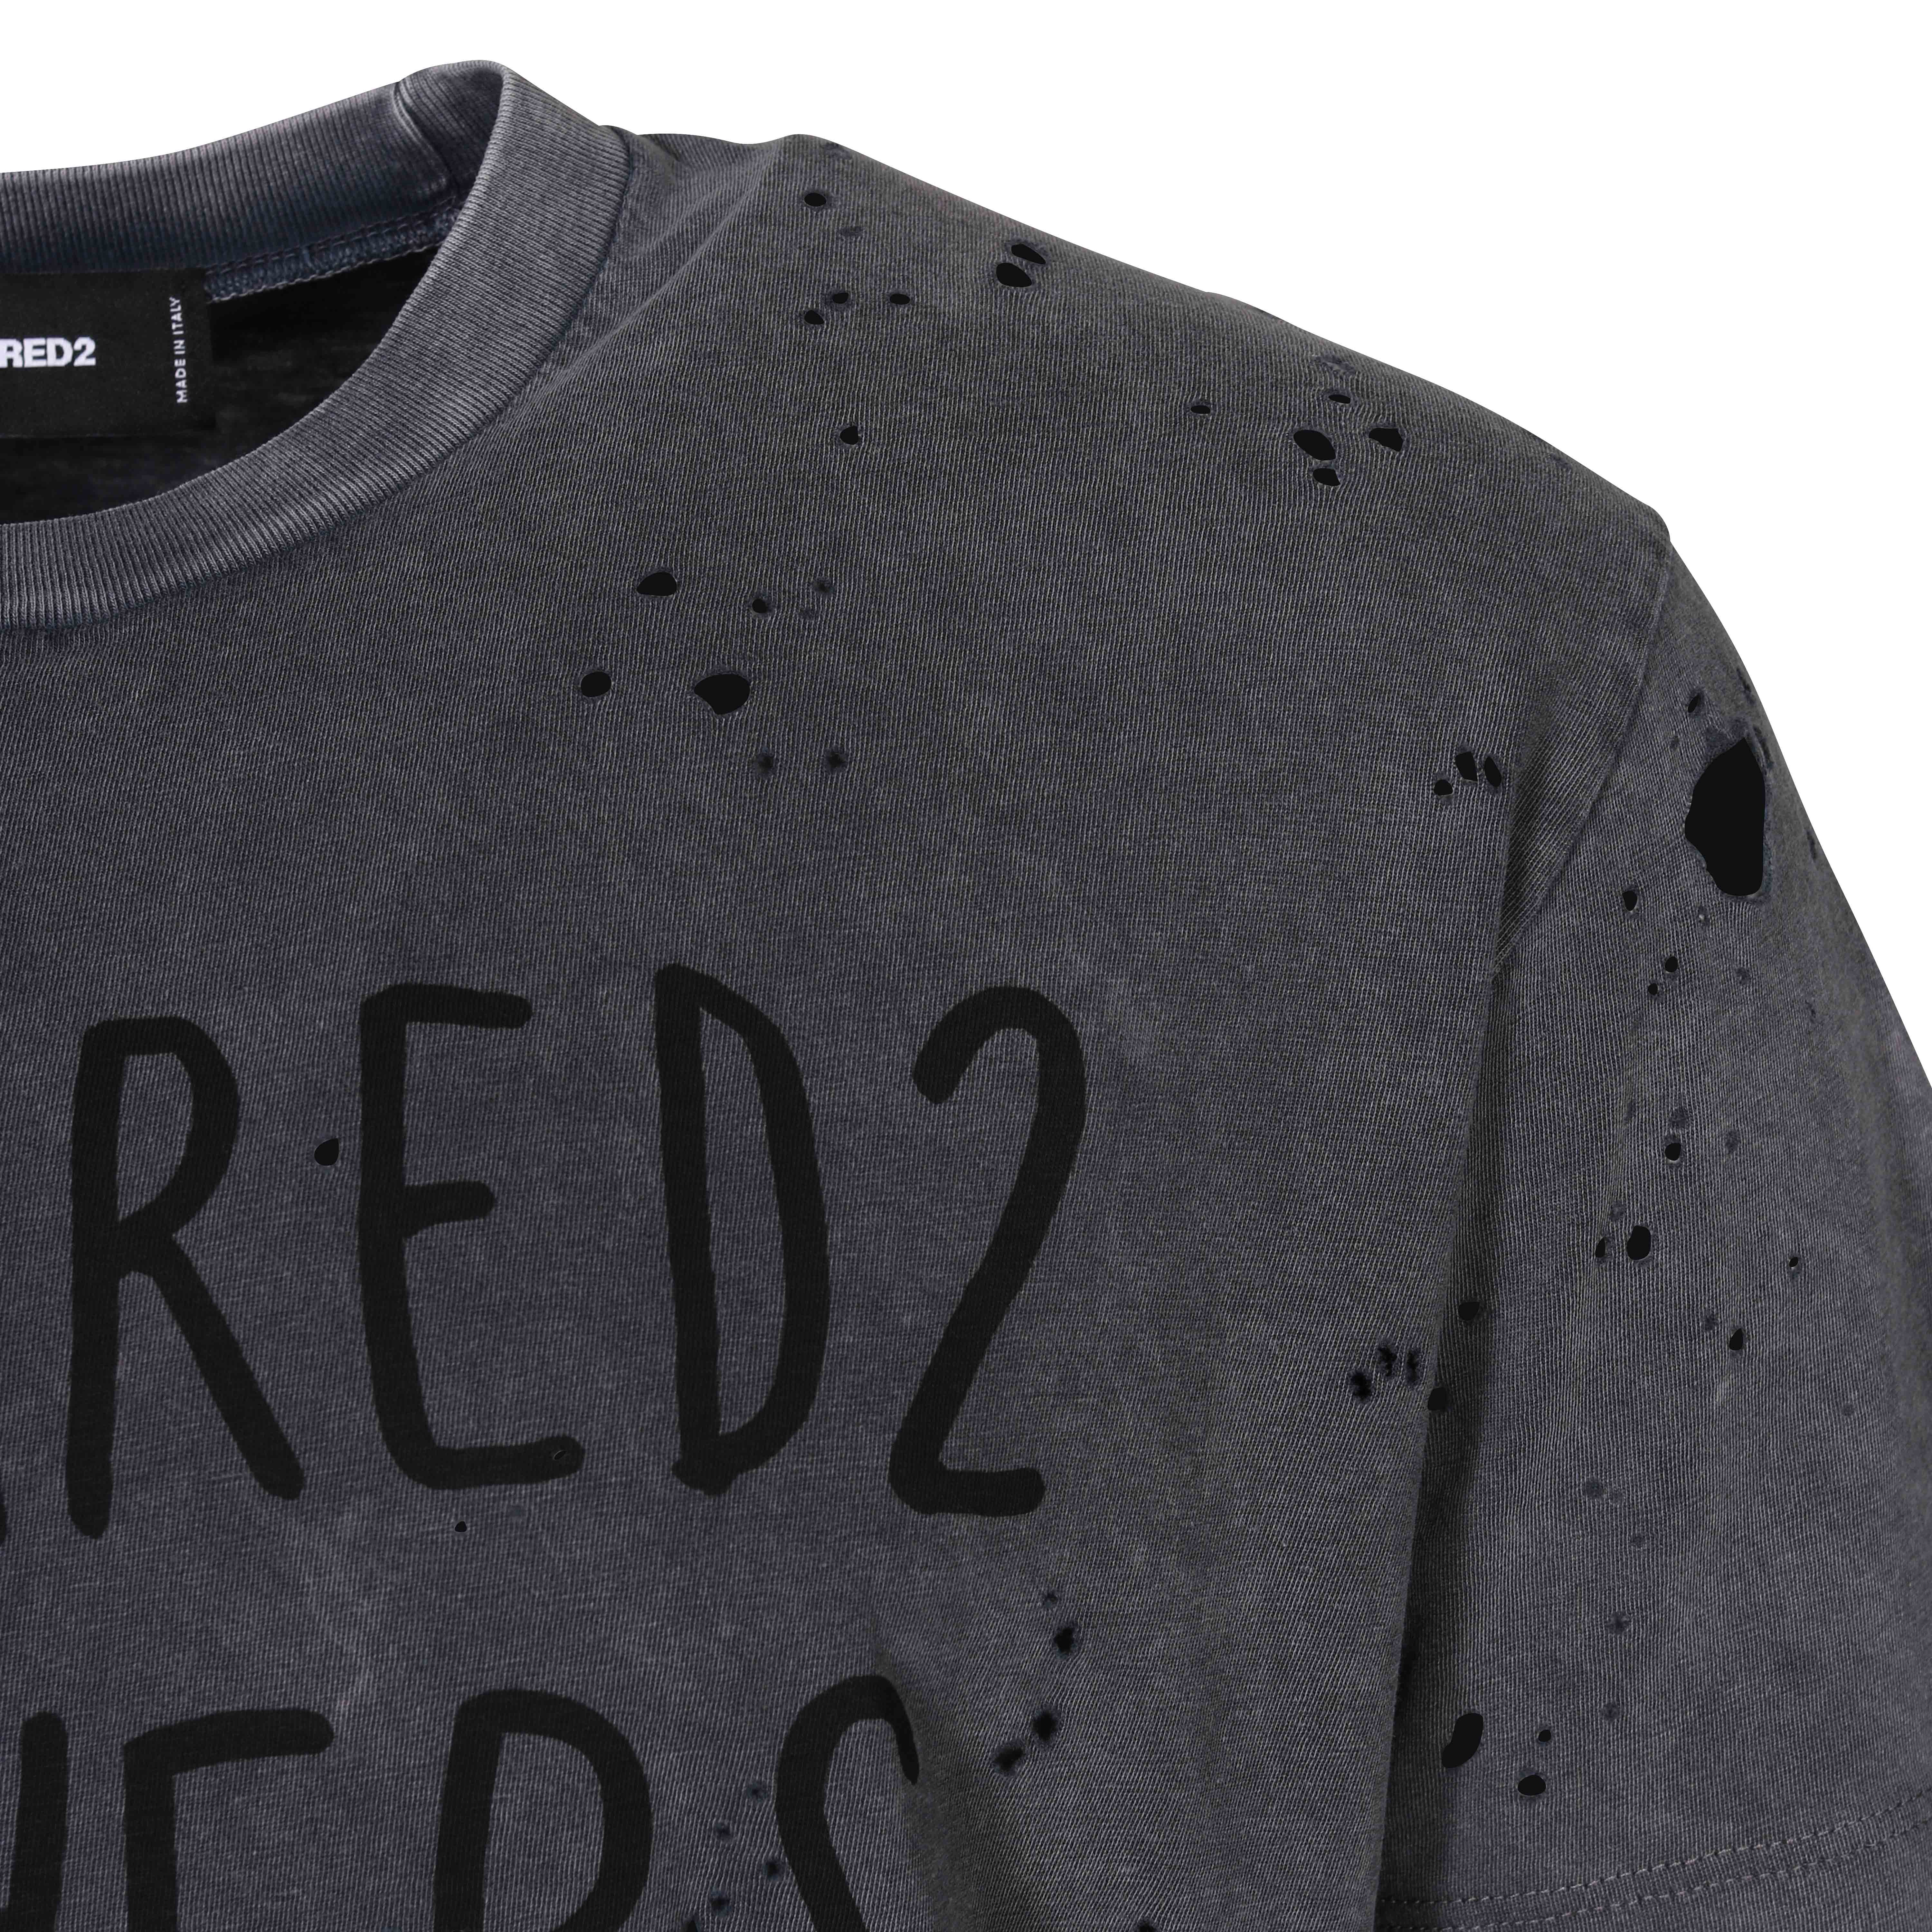 Dsquared Still Rule Cool T-Shirt in Washed Dark Grey